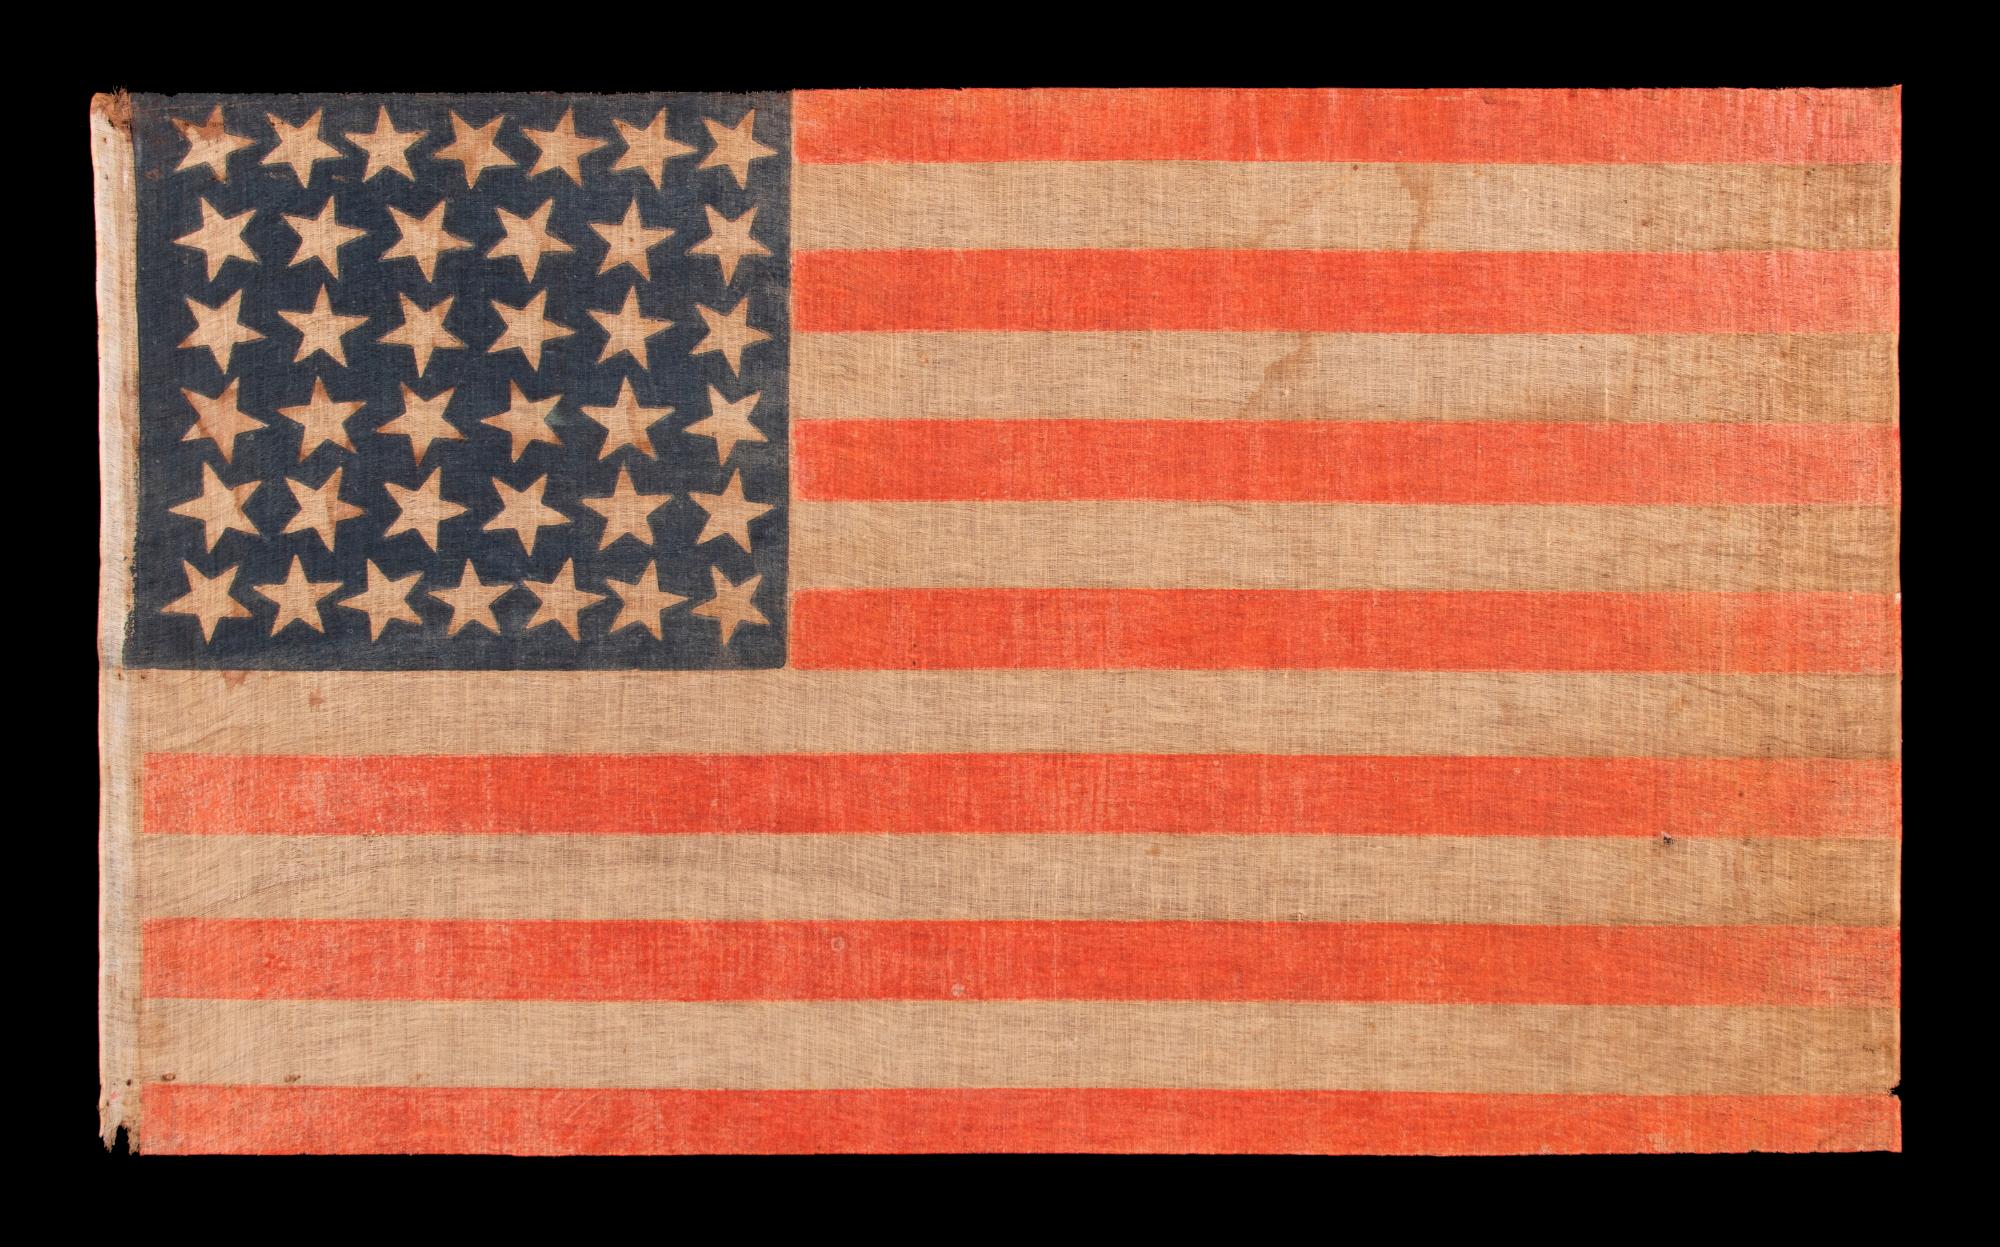 38 STAR ANTIQUE AMERICAN PARADE FLAG WITH JUSTIFIED ROWS OF 7-6-6-6-6-7 AND SCATTERED STAR ORIENTATION, MADE DURING THE PERIOD WHEN COLORADO WAS THE MOST RECENT STATE TO JOIN THE UNION, 1876-1889

38 star American national parade flag, printed on